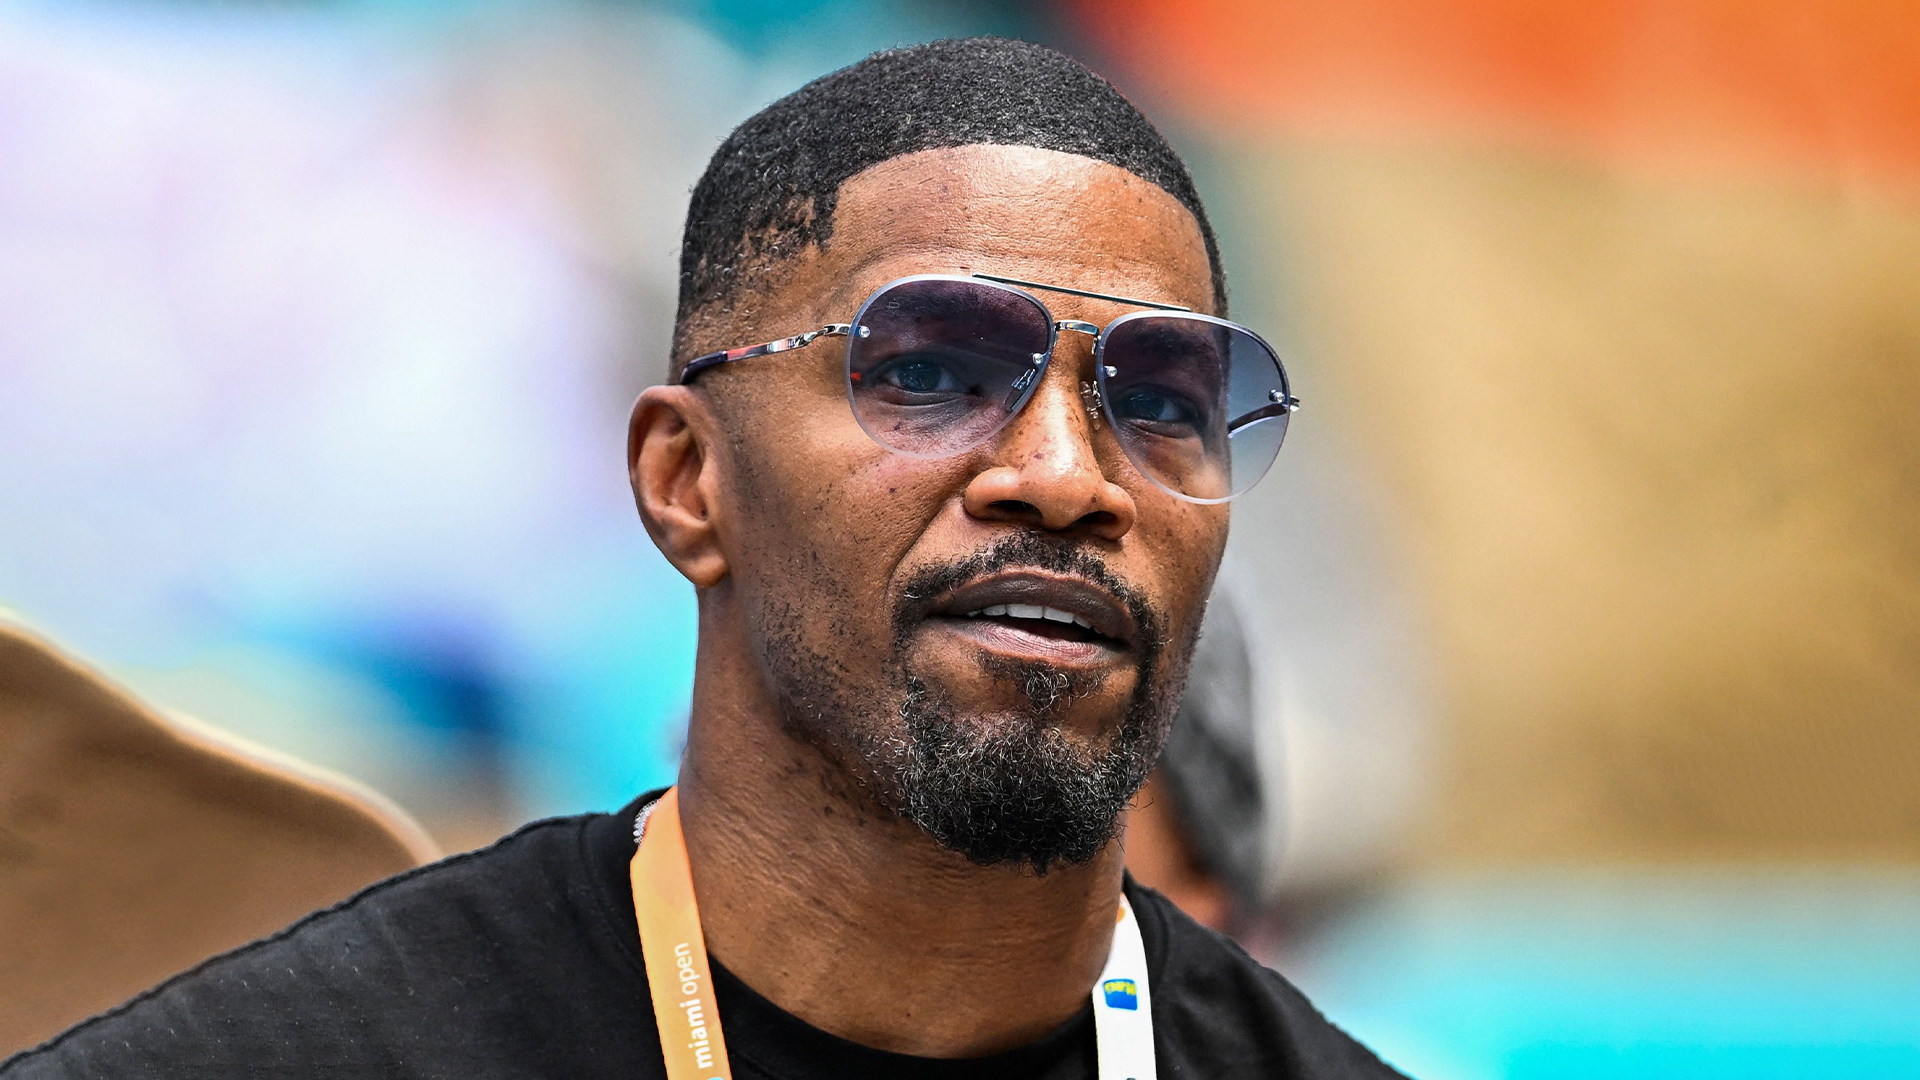 Jamie Foxx hospitalized after terrifying 'medical condition' as fans 'fall to their knees' in fear for actor's health